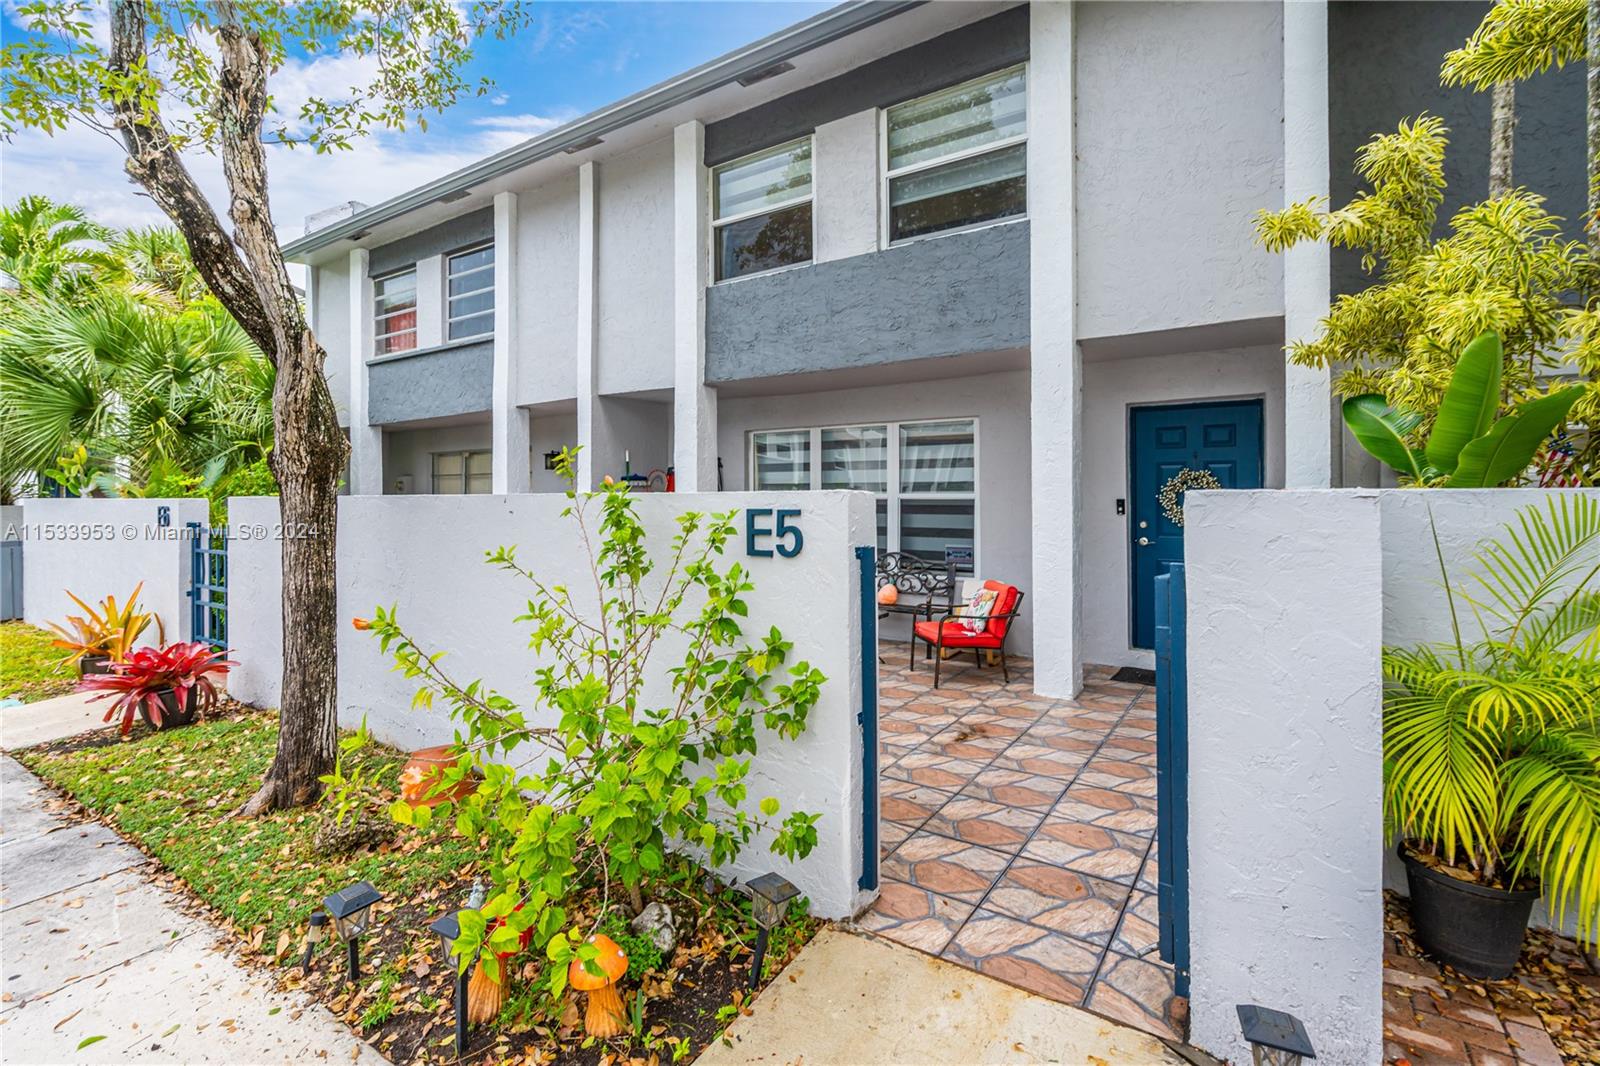 Property for Sale at 14123 Sw 66th St St E5, Miami, Broward County, Florida - Bedrooms: 3 
Bathrooms: 3  - $390,000